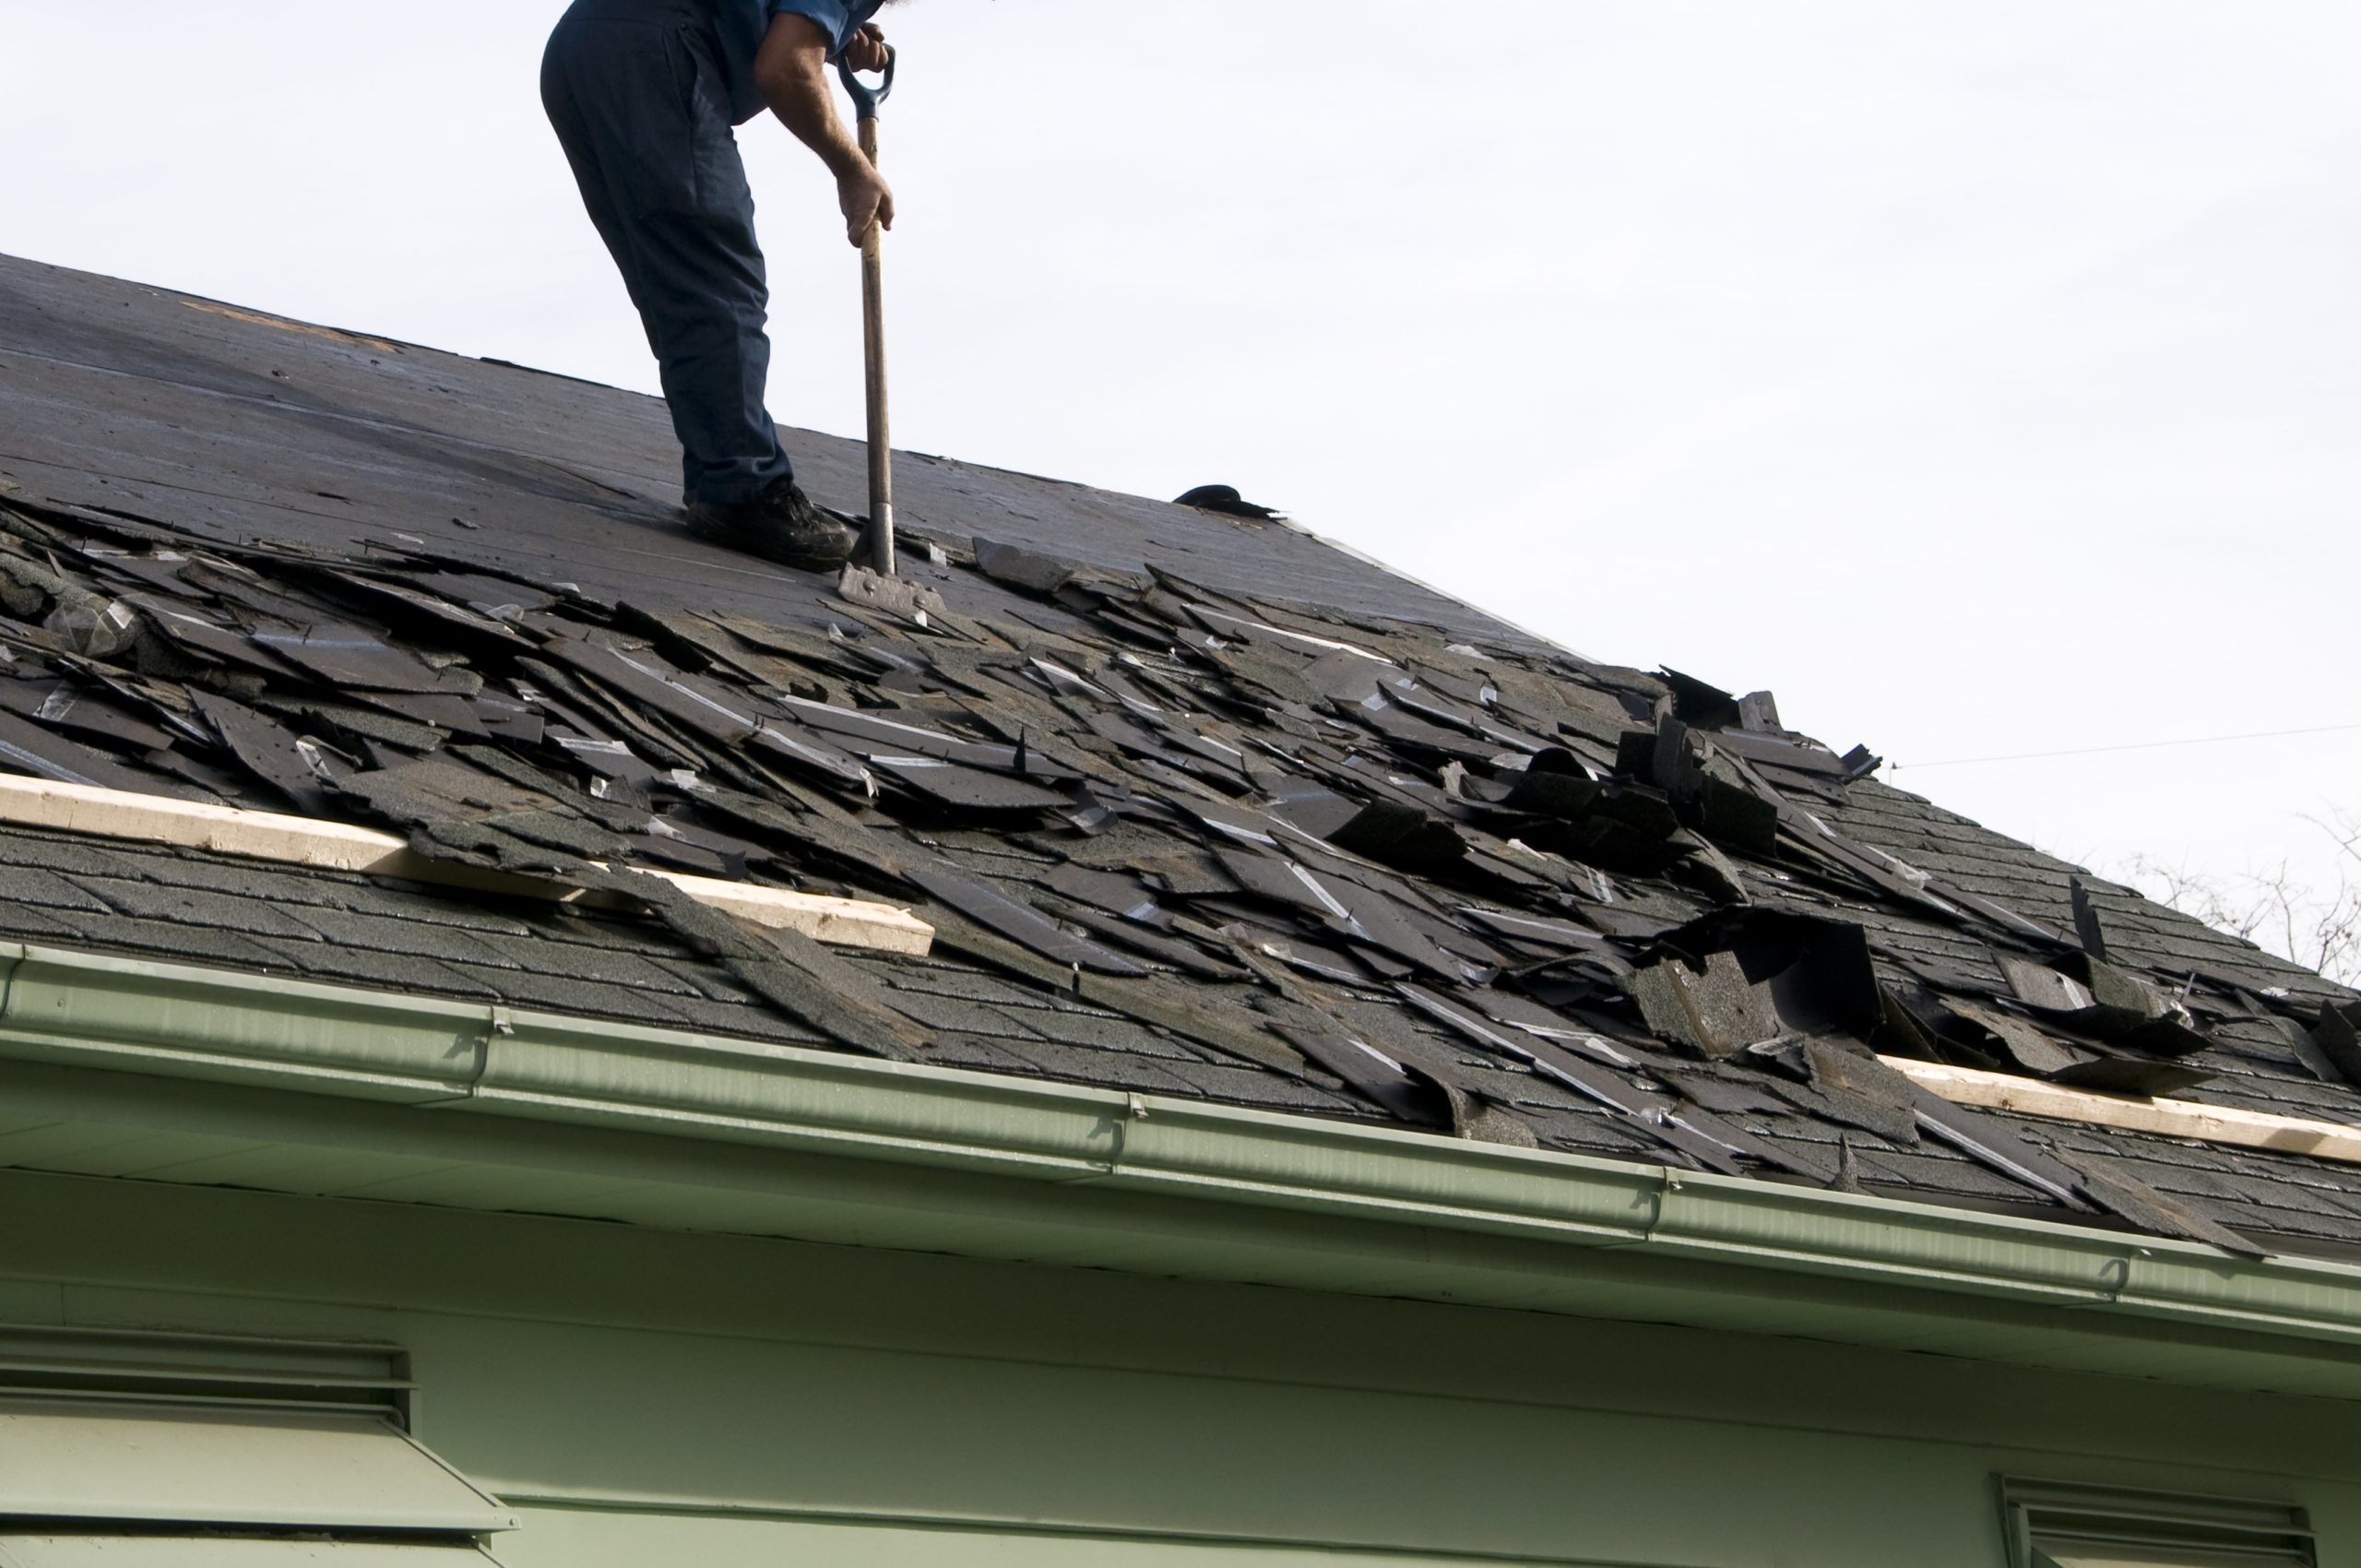 How to Dispose of Old Roofing Shingles